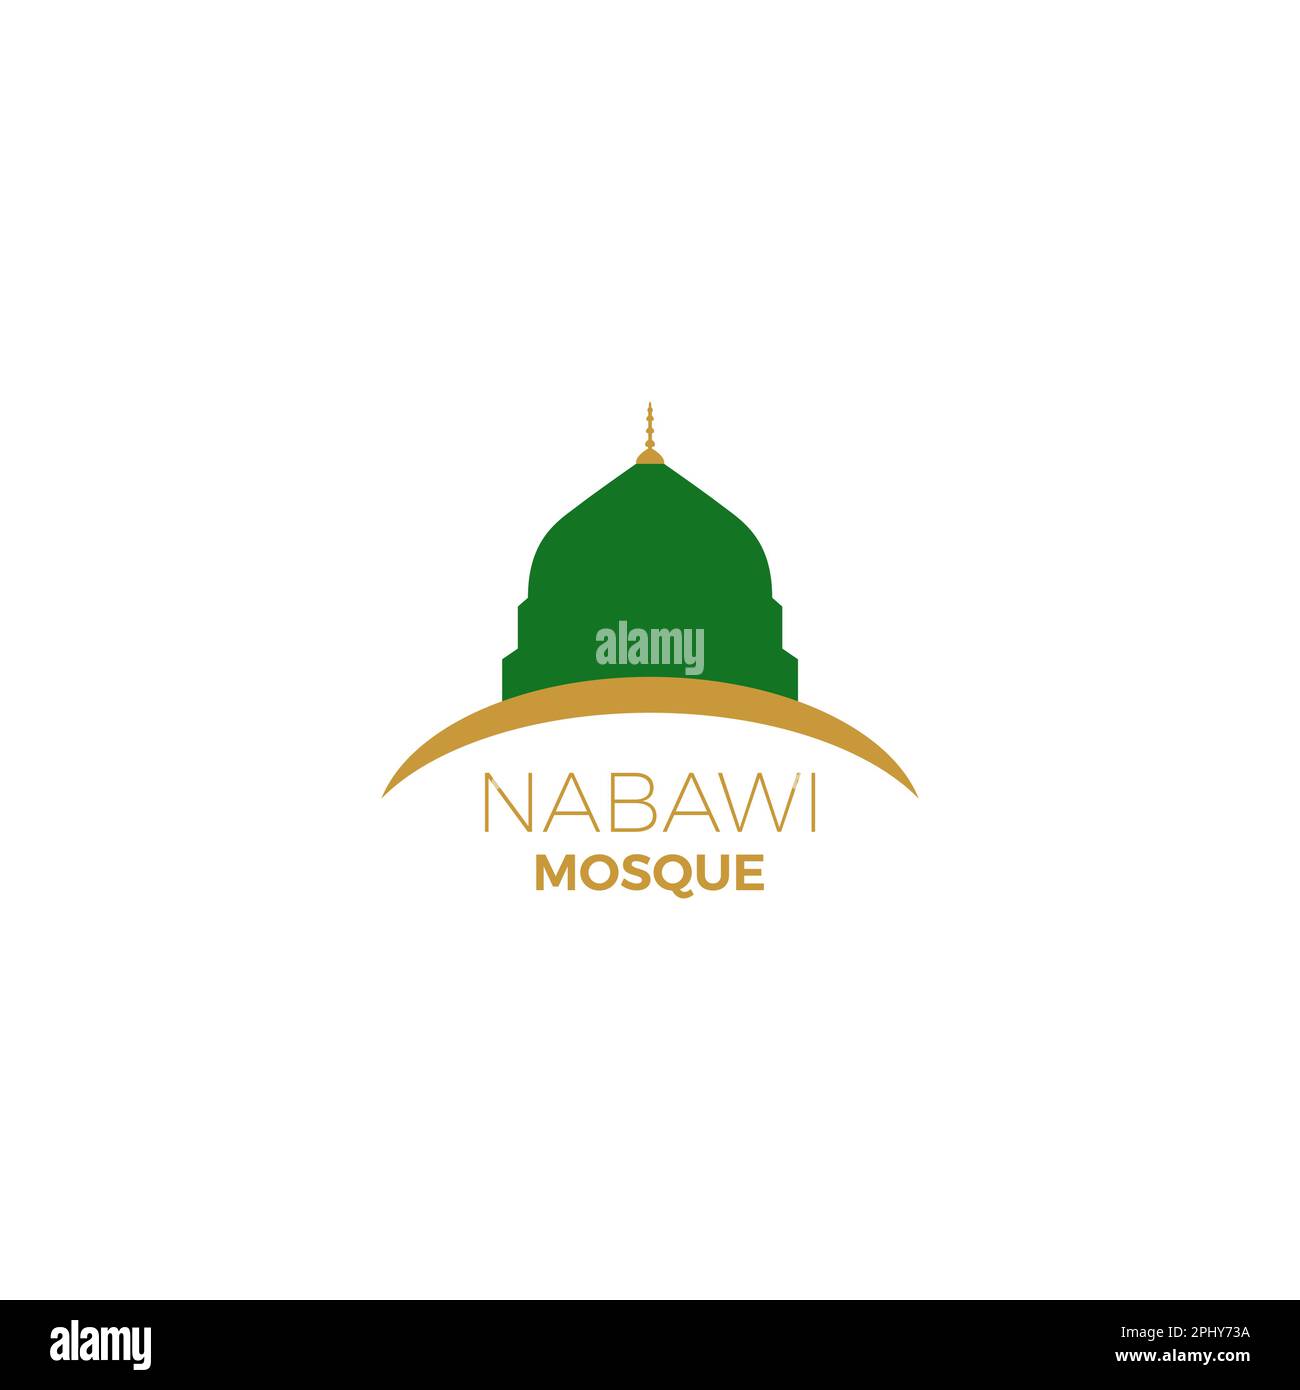 Green nabawi mosque illustration. masjid nabawi mosque logo inspiration Stock Vector